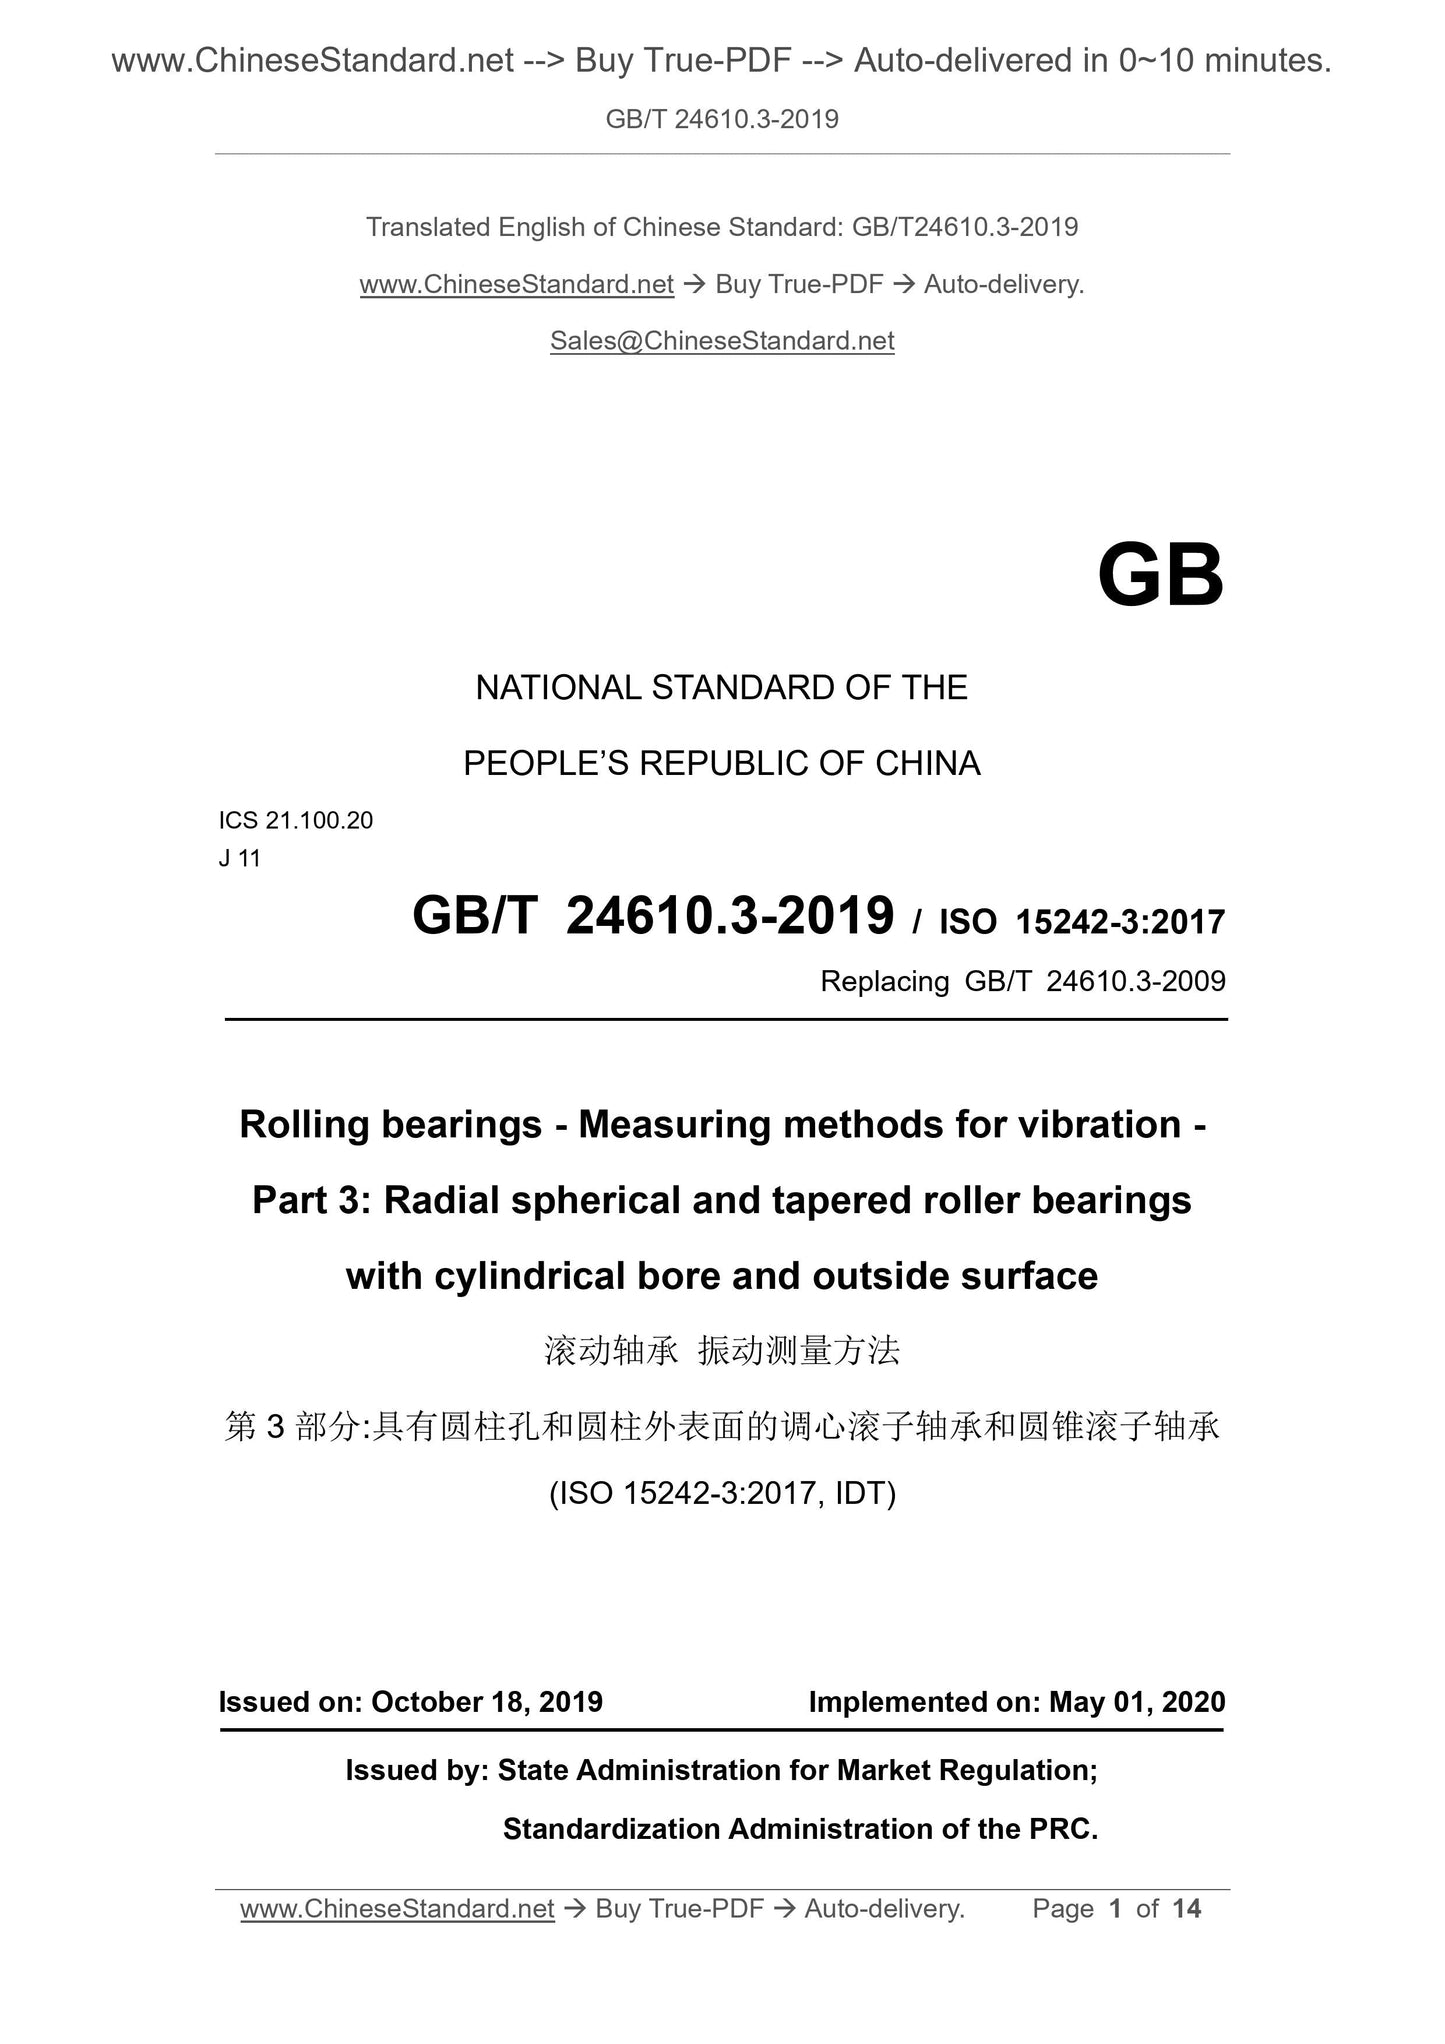 GB/T 24610.3-2019 Page 1